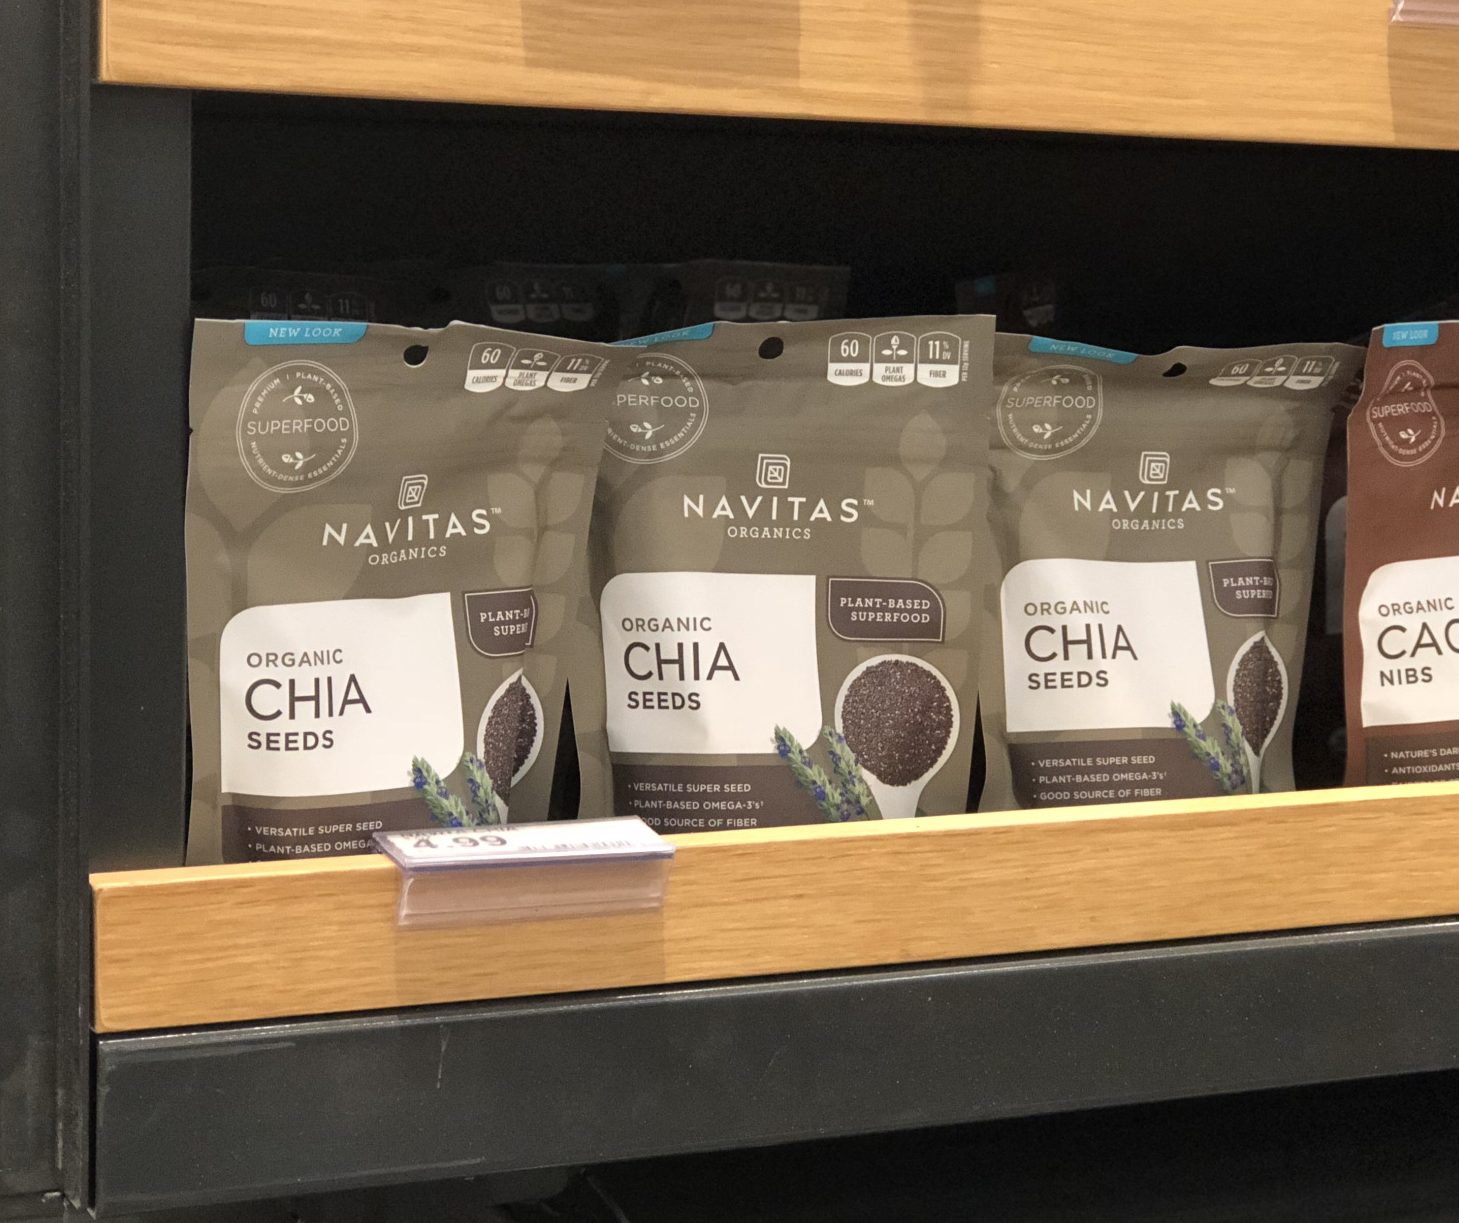 score chia seeds with these great target deals – Navitas chia seeds on a shelf